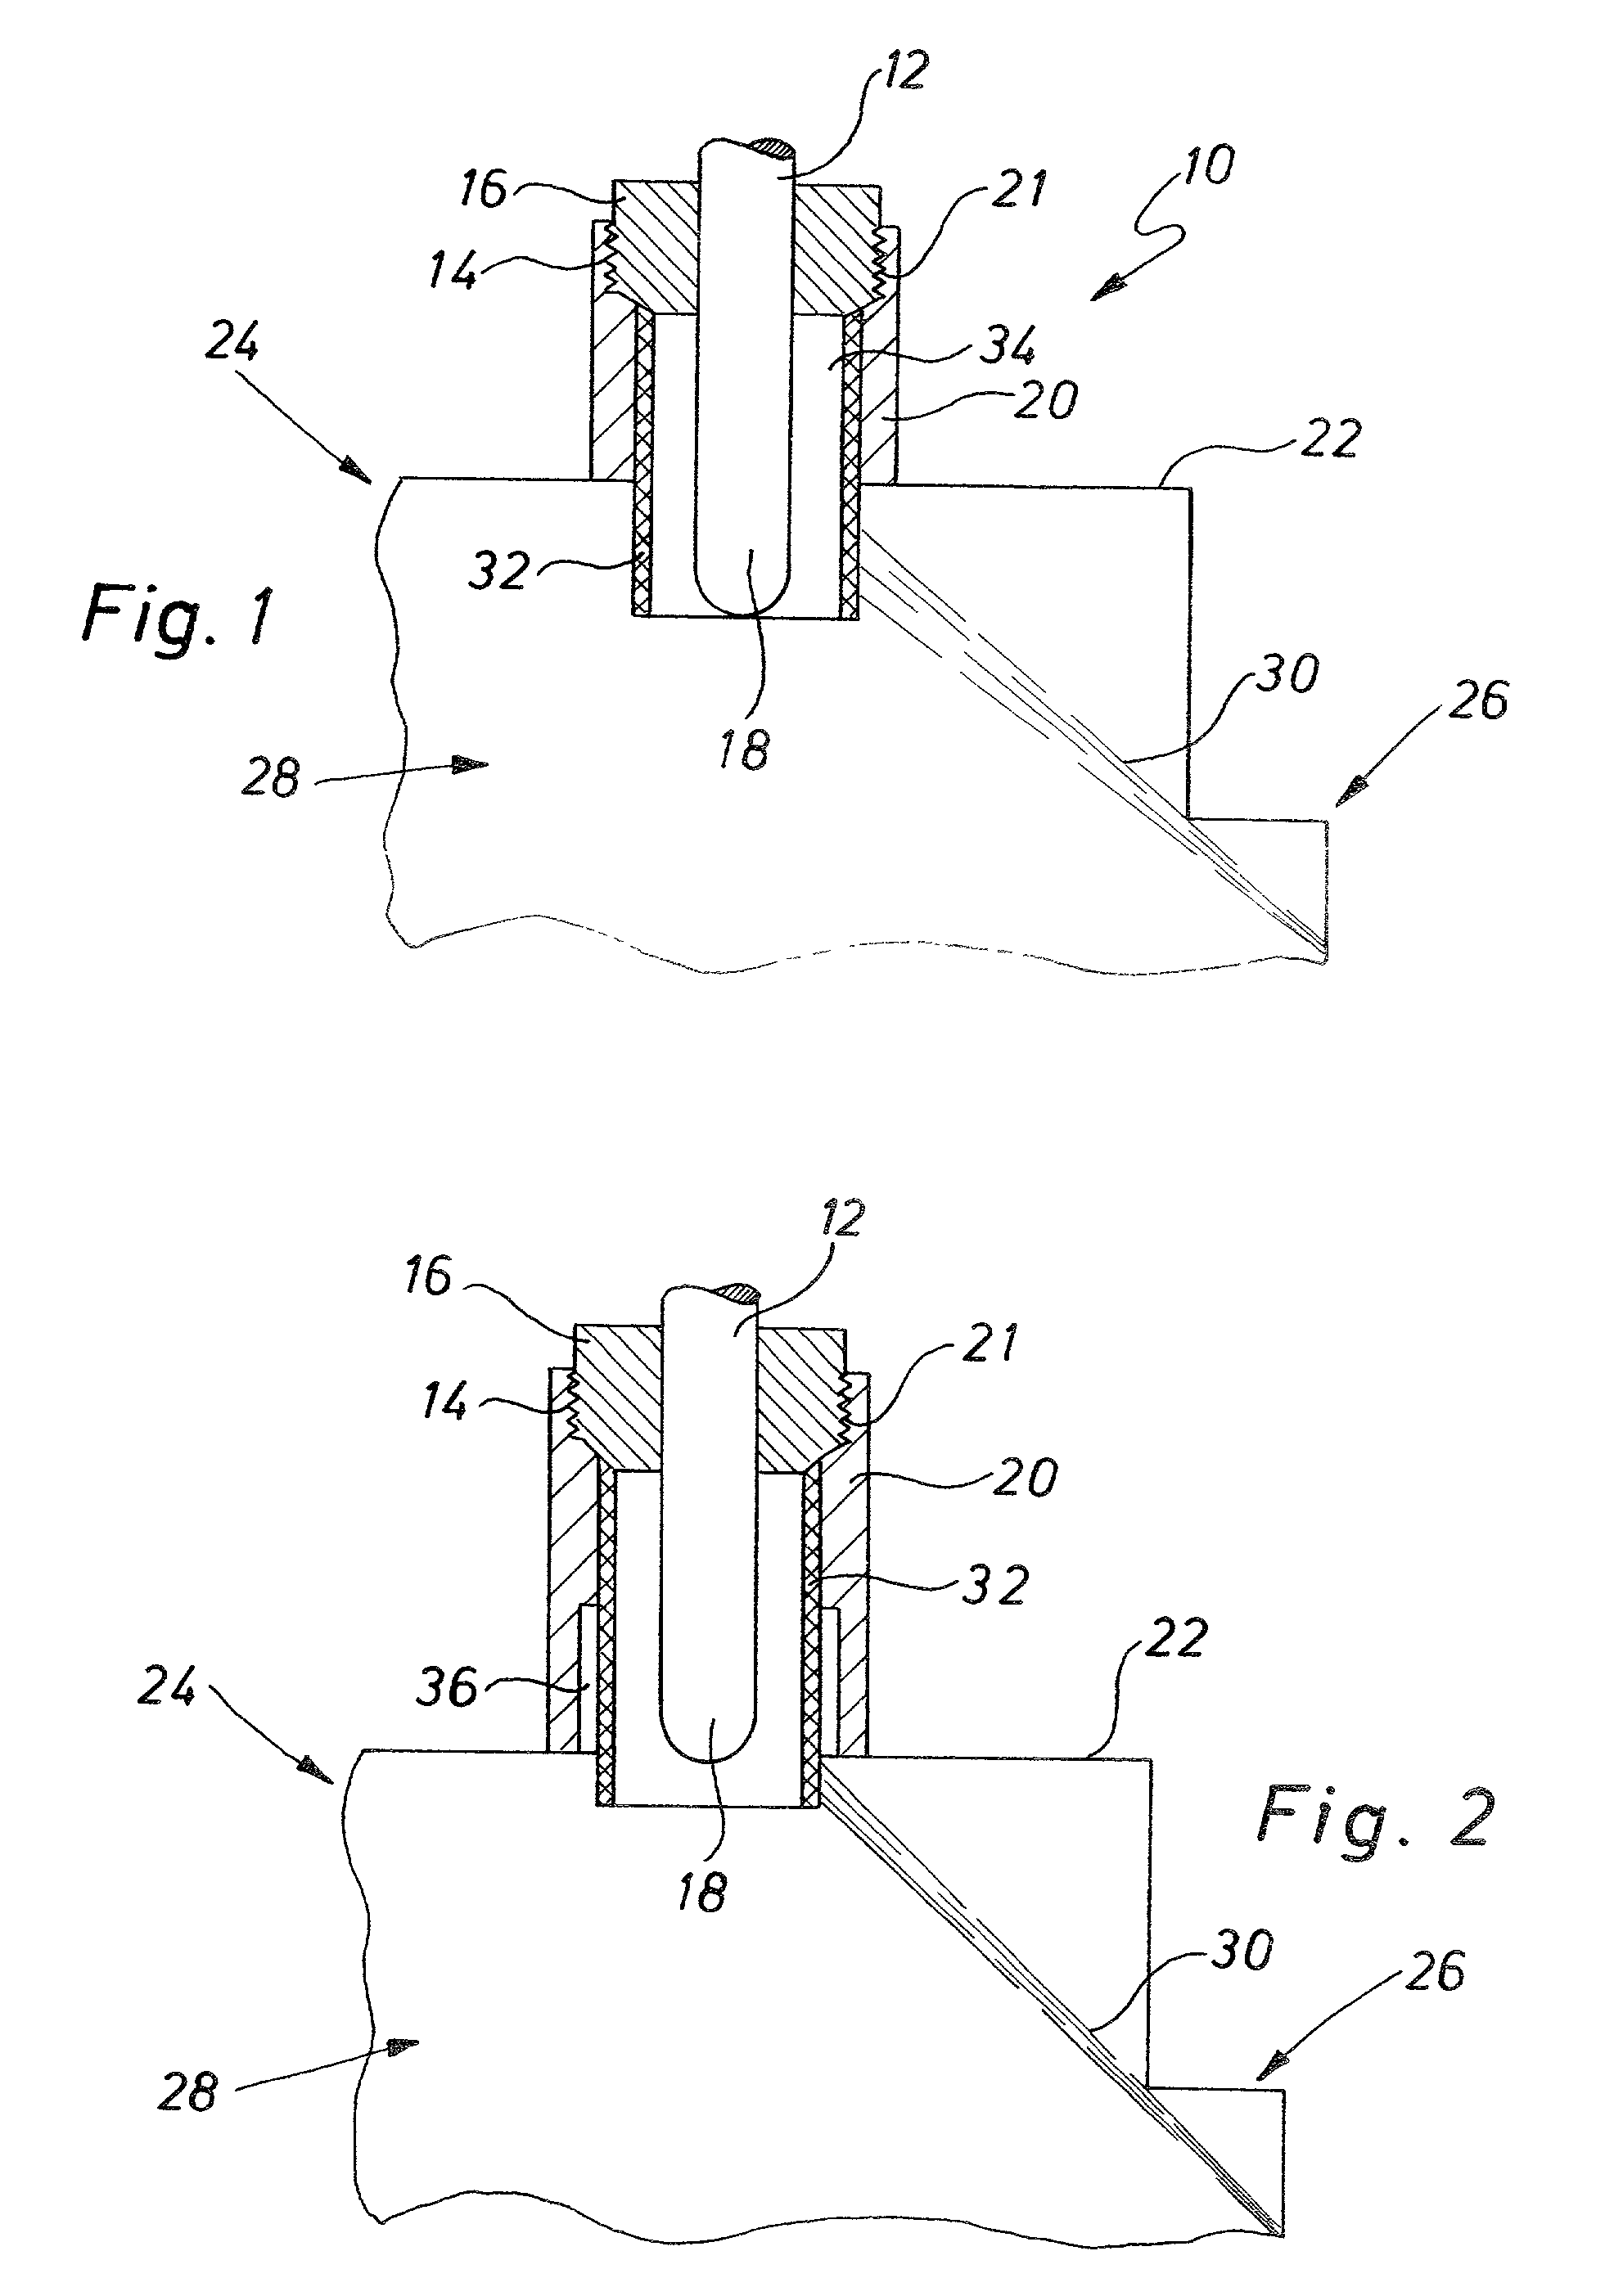 Ignition device, particularly for an atomizer burner of a motor vehicle heating appliance